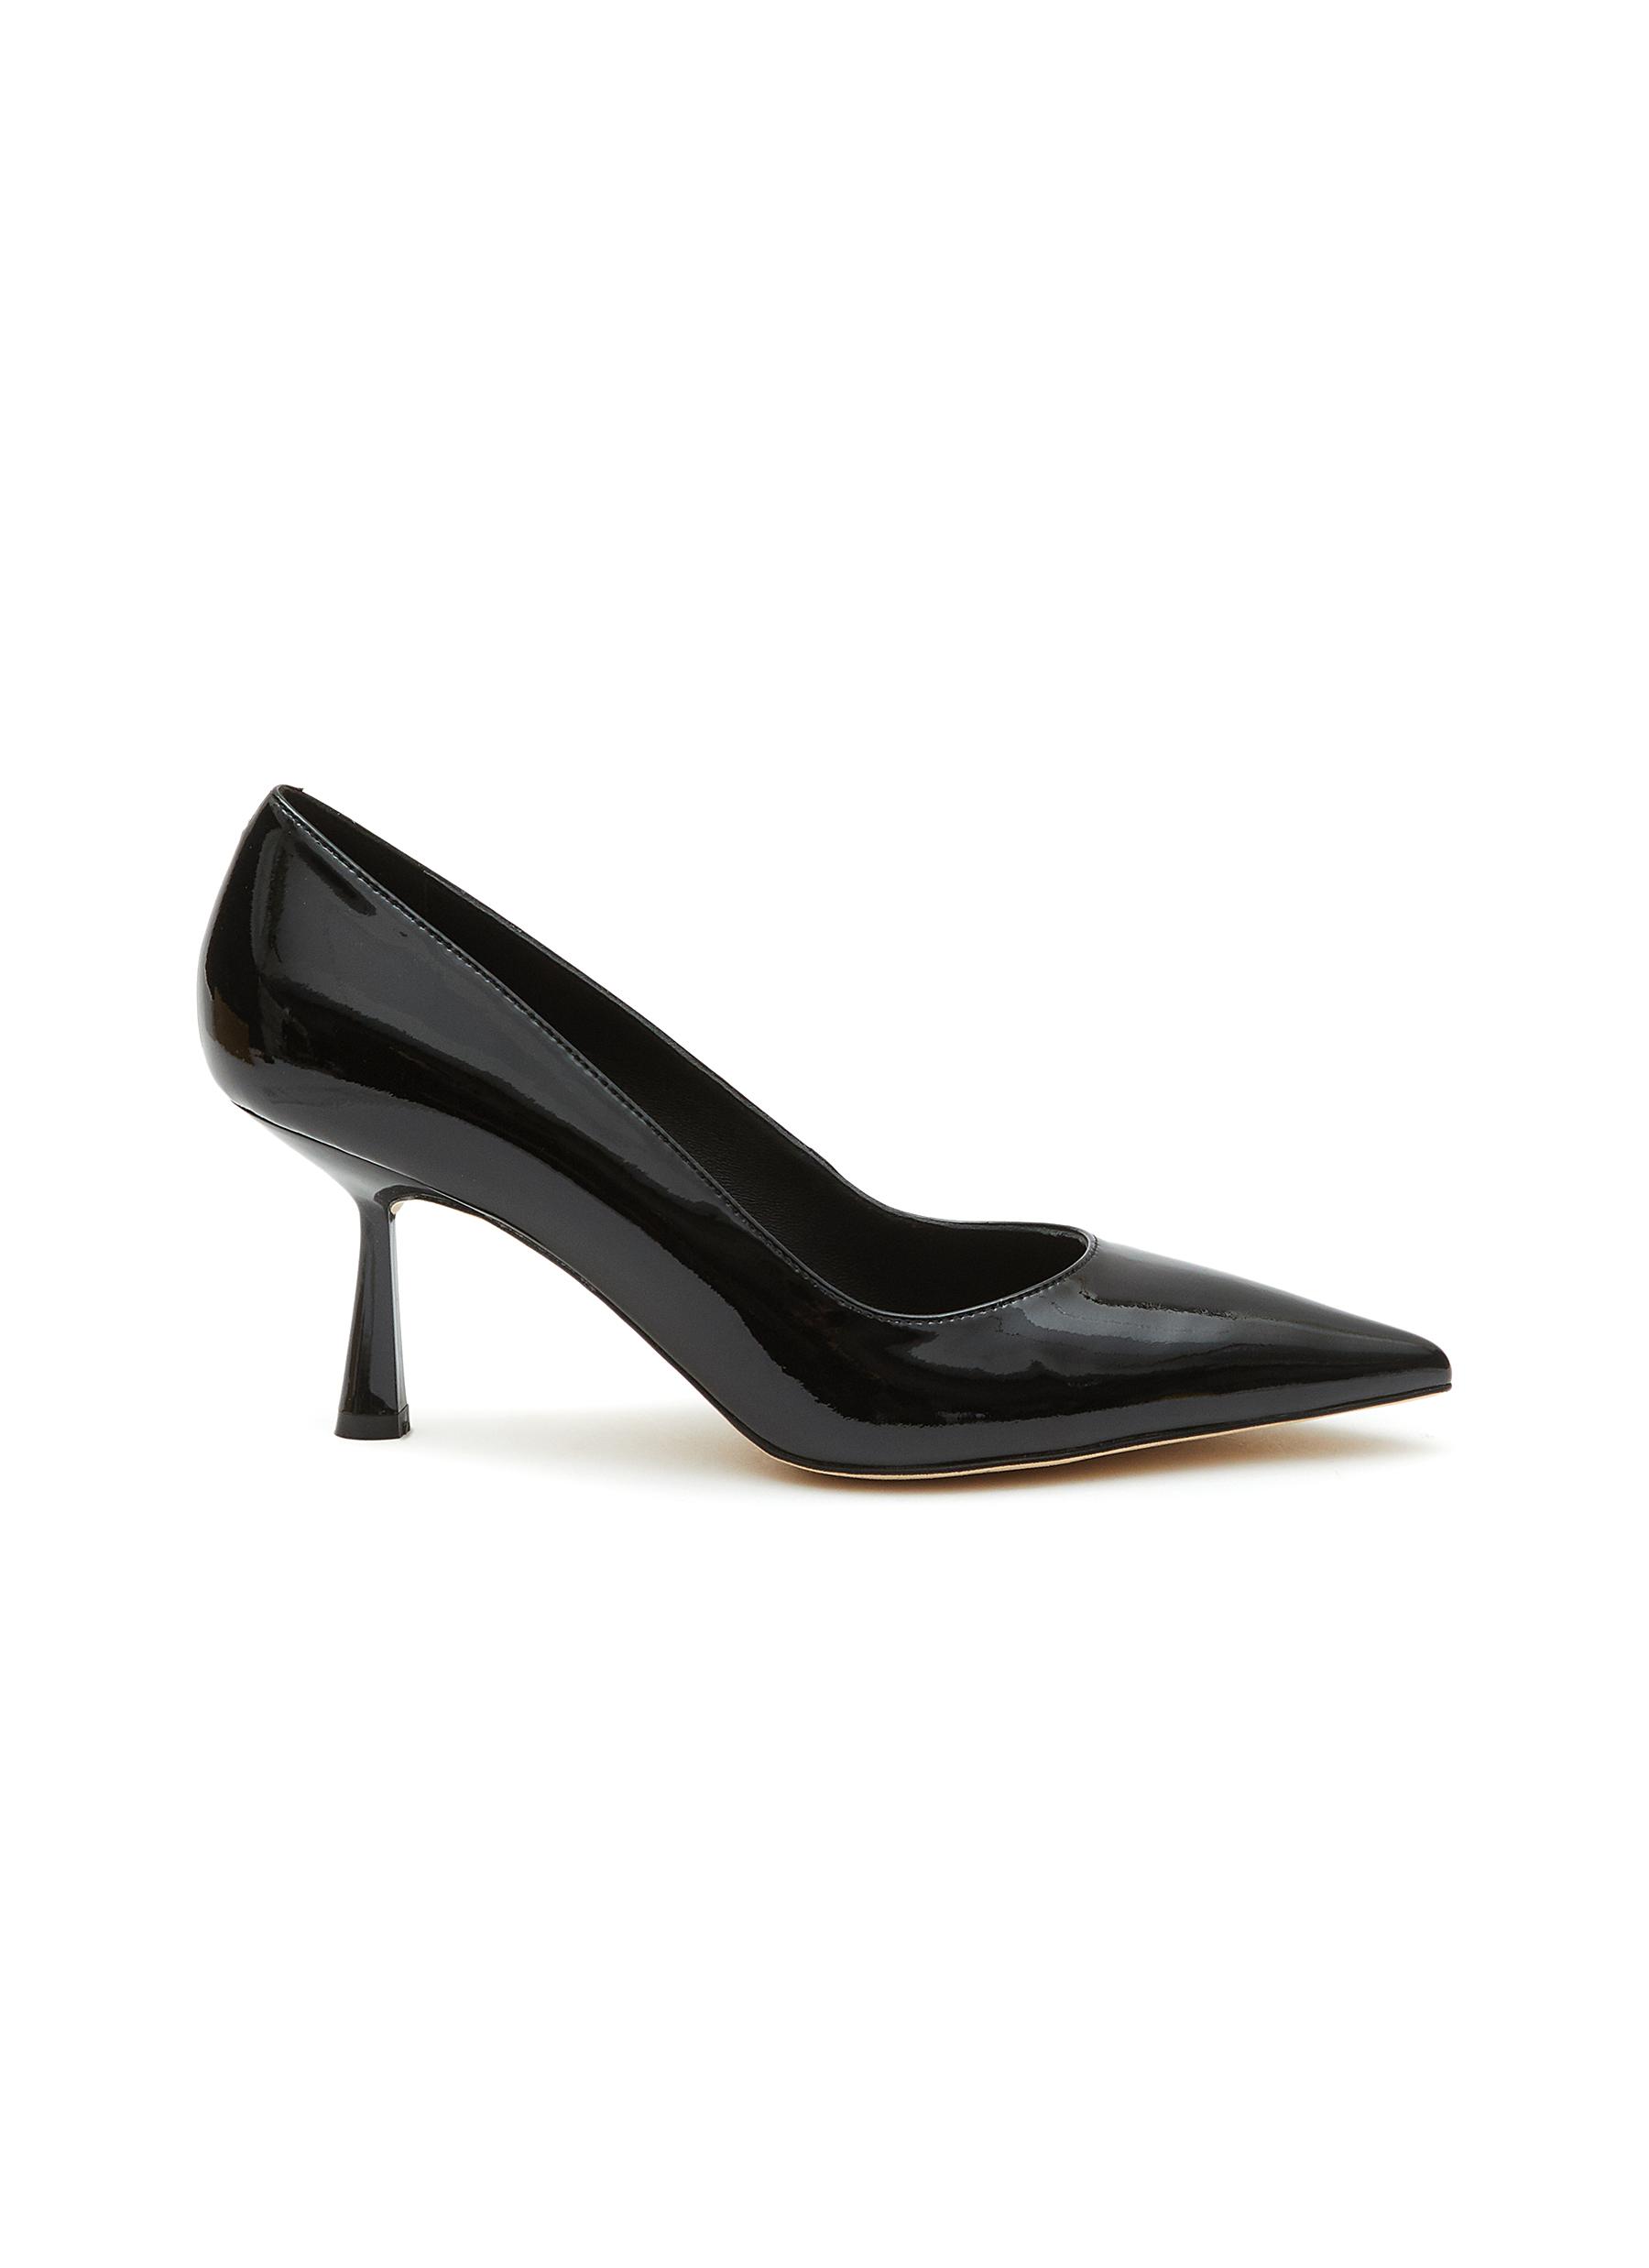 Pedder Red 'juliet' 75 Point Toe Patent Leather Pumps In Black